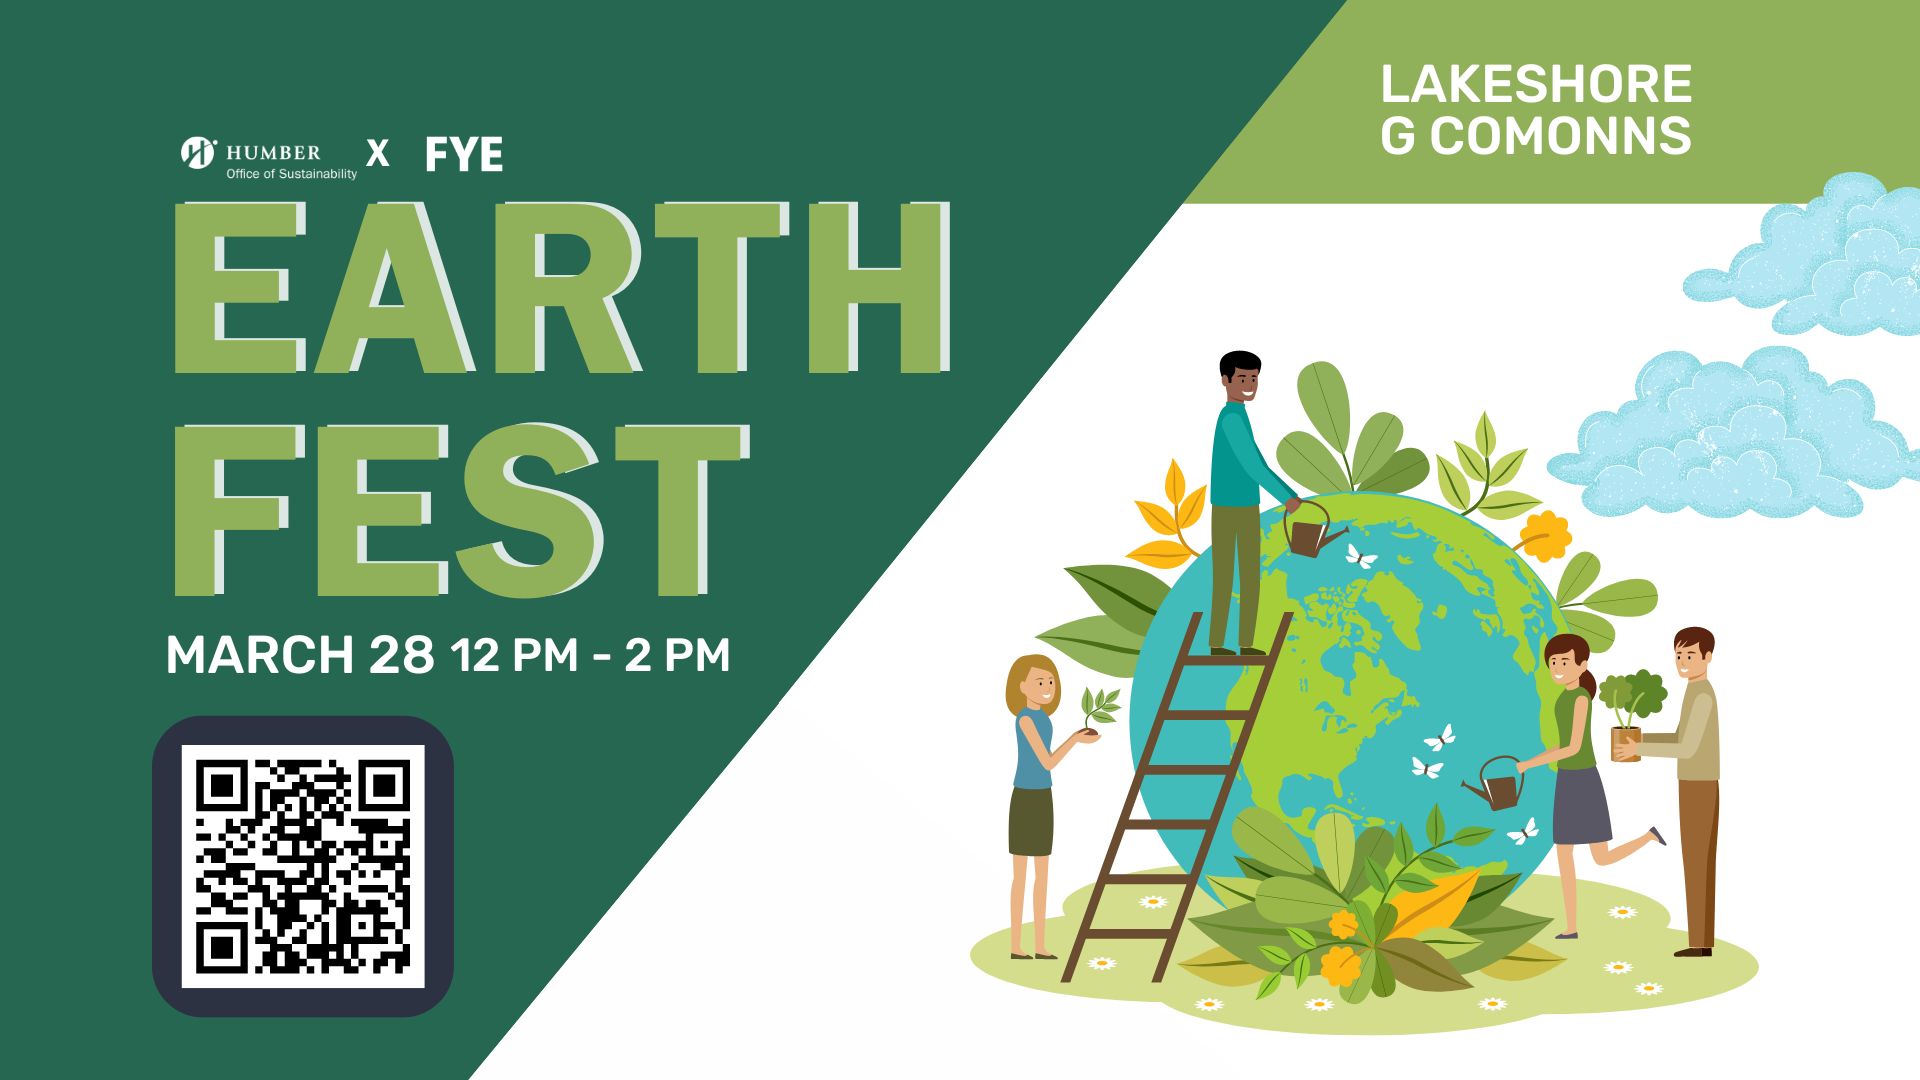 Horizontal poster with planet Earth being taken care of by people. The poster title says “Earth Fest” and the date of the event “March 28” from 12 pm to 2 pm. Below there’s a QR code for people to scan and register for the event. 